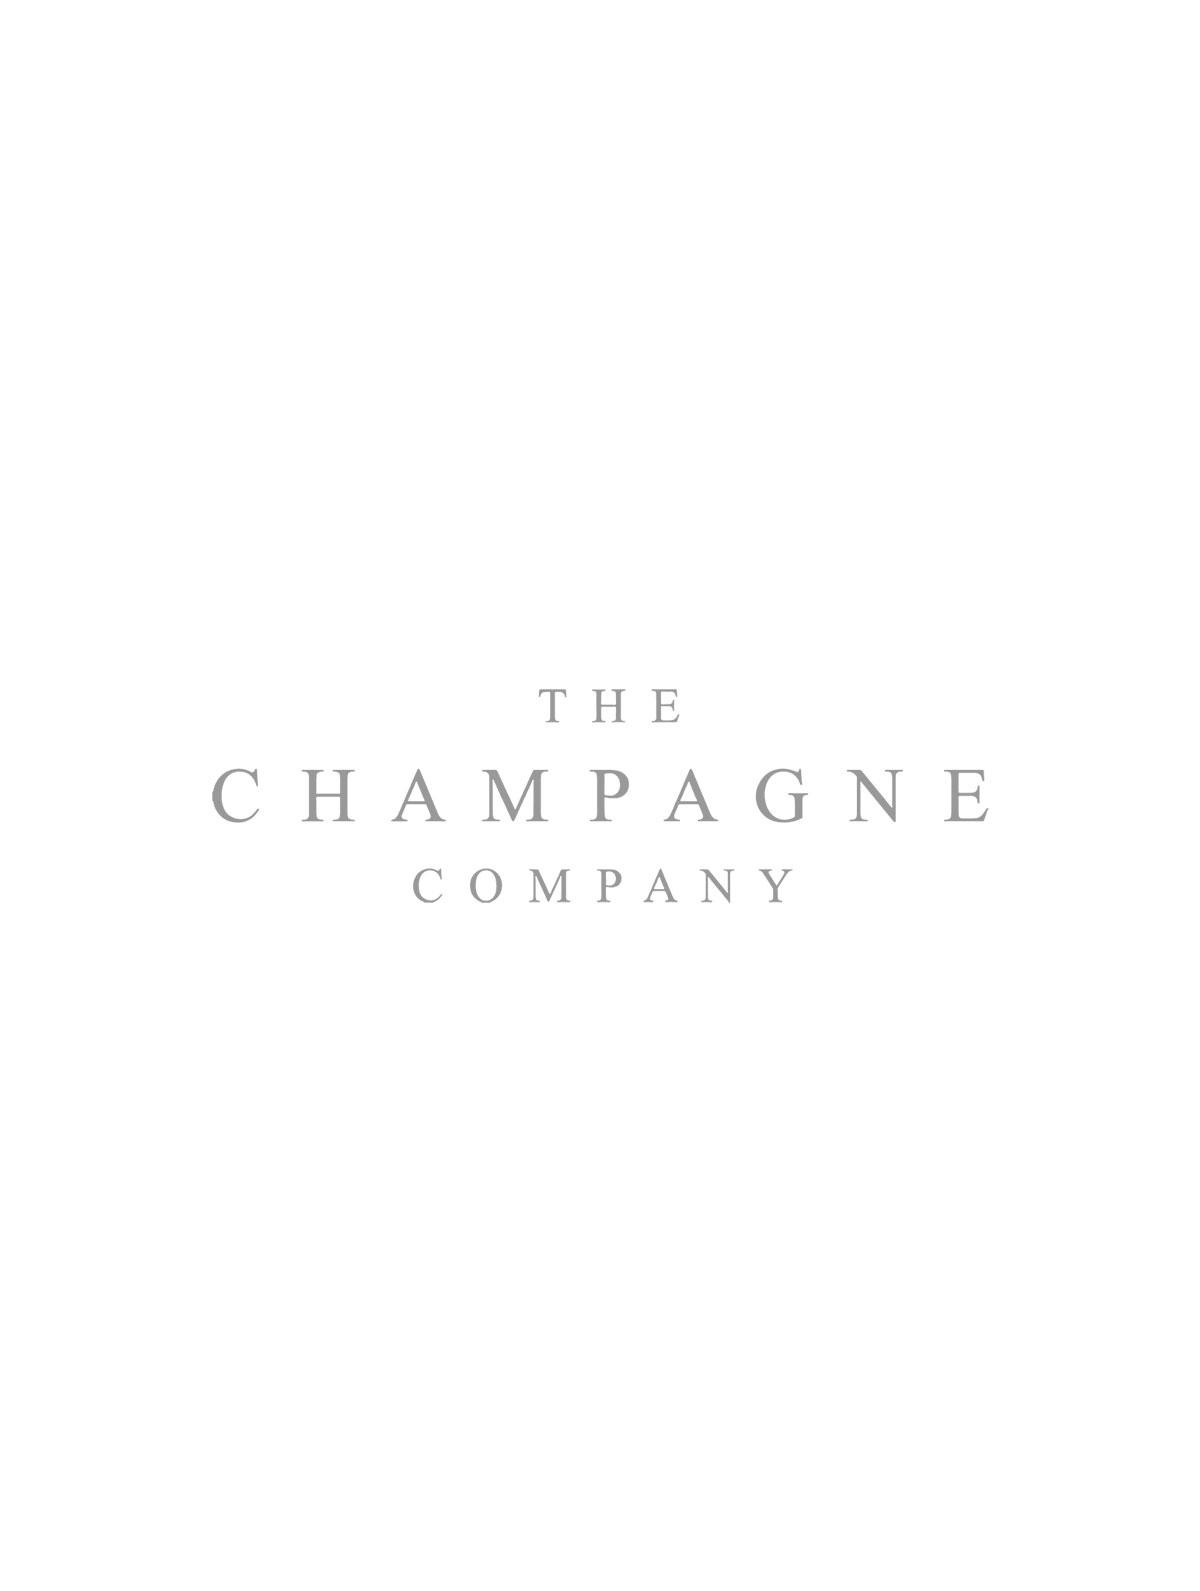 Pommery Champagne Collection Case Deal 6x75cl